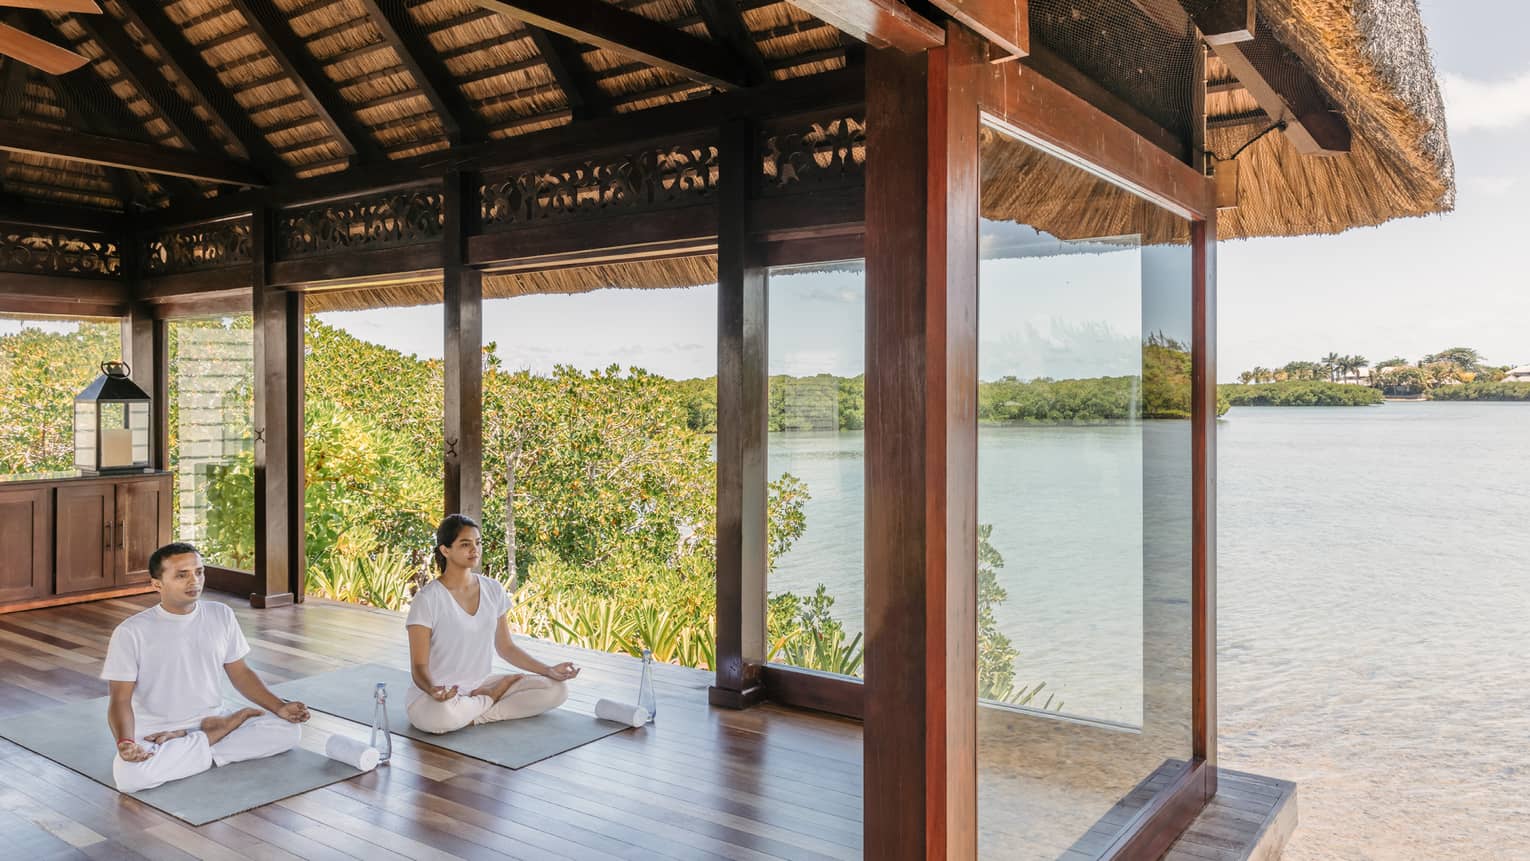 Two people wearing white seated in yoga poses in open-air spa yoga pavilion by beach